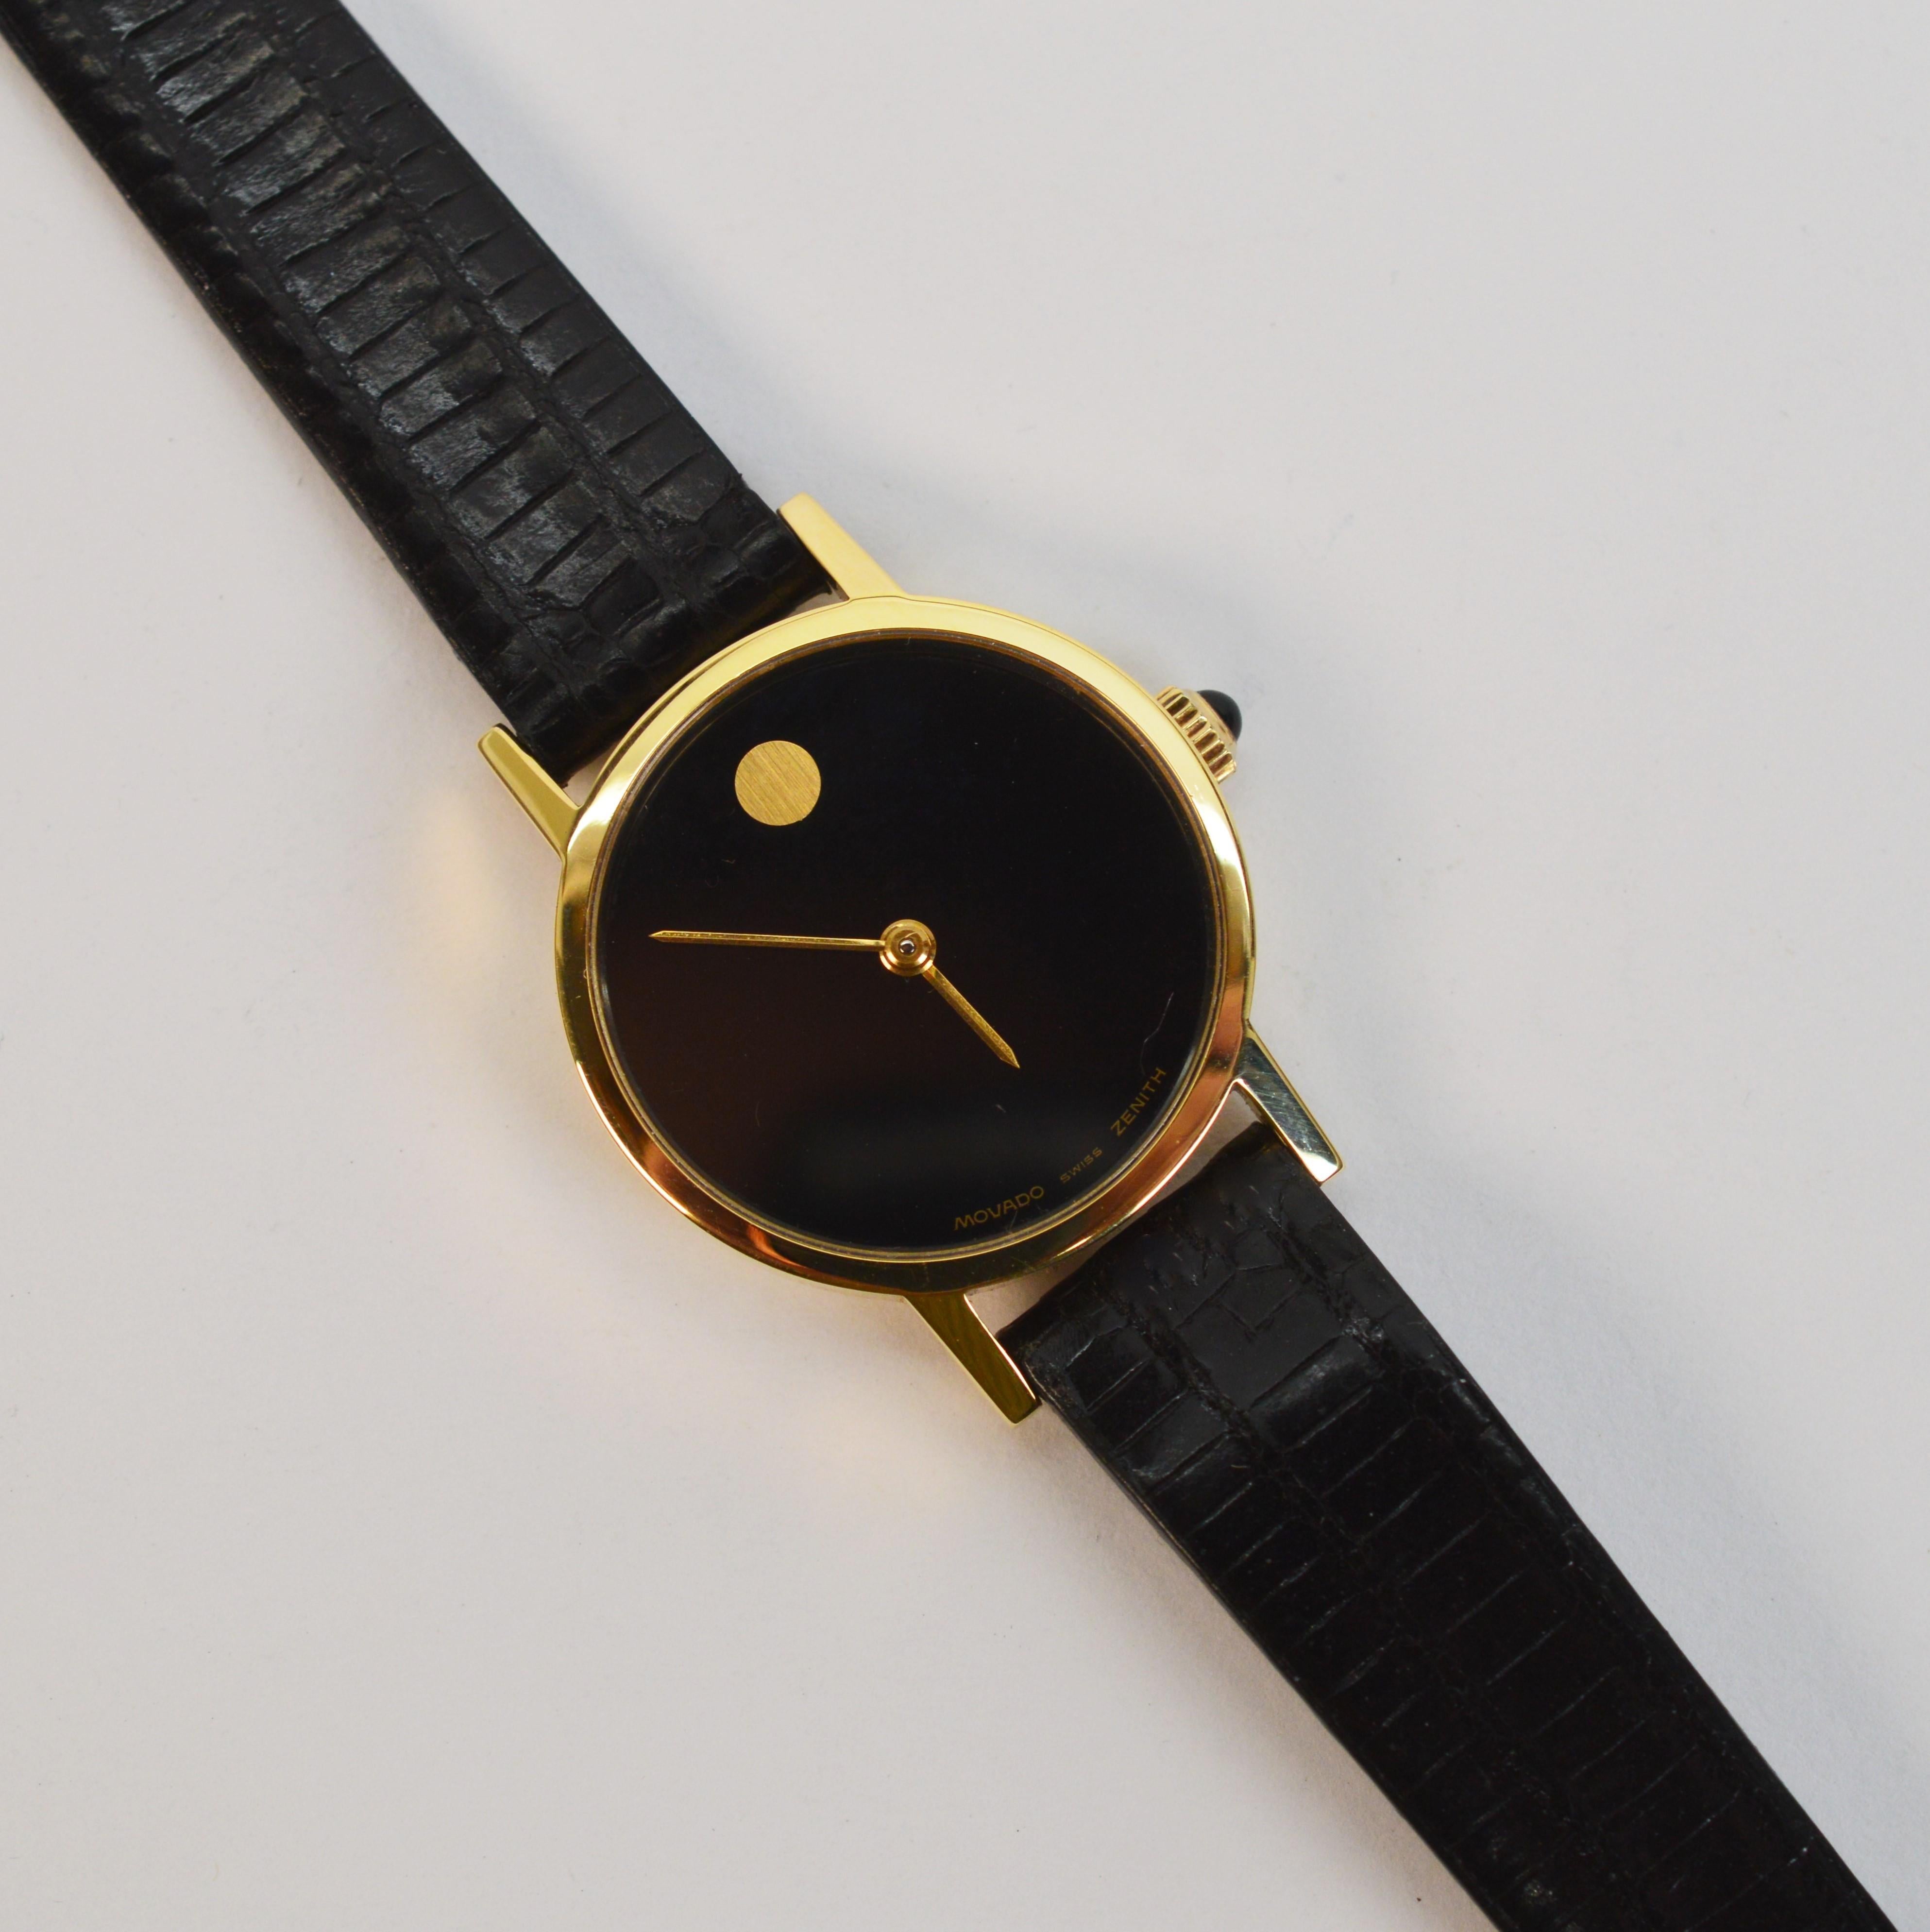 Slim and sleek, this Ladies classic 14 karat yellow gold Movado Museum Wrist Watch delivers timeless style. Swiss made with a manual wind Zenith movement. Reference number 362180305, the 14K gold case measures 24mm. Circa 1995, the watch has a